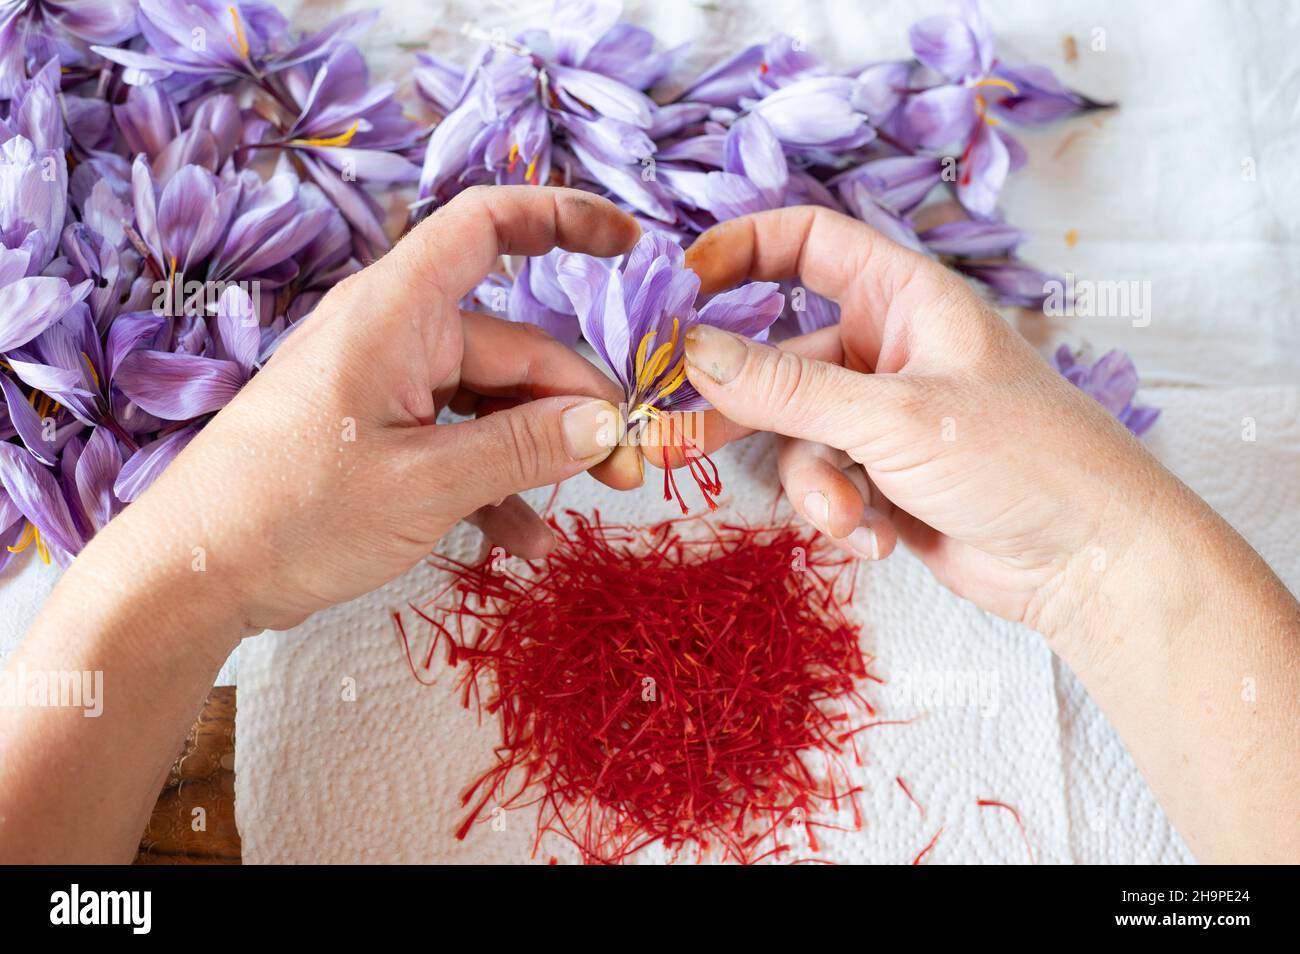 Saffron harvest at o Delices de la Bergere in Marches, in the Drome department (south-eastern France). Saffron stamens being picked by hand from Crocu Stock Photo